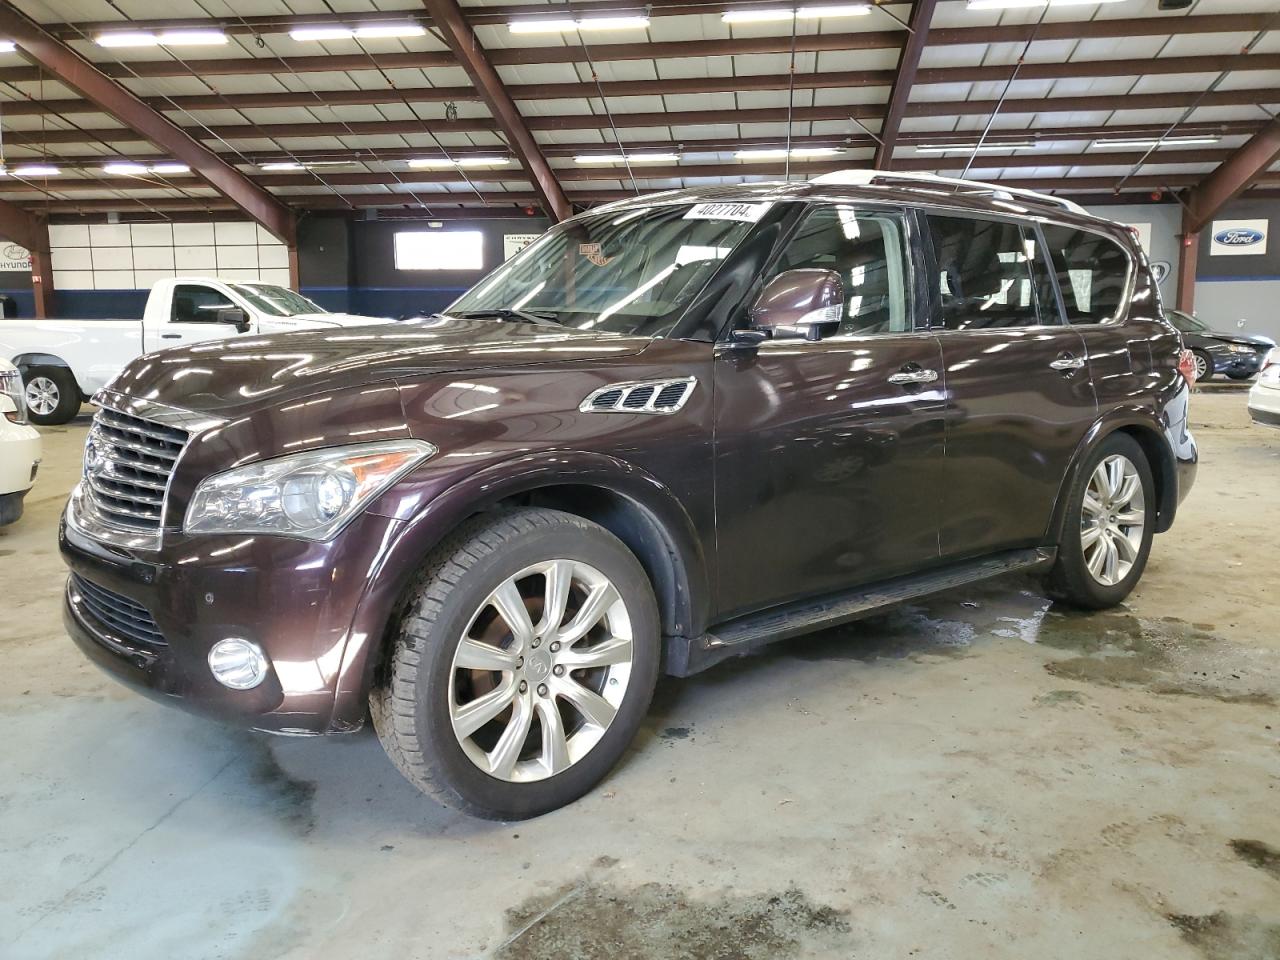 2012 Infiniti QX56 for sale at Copart East Granby, CT Lot #40277*** |  SalvageReseller.com